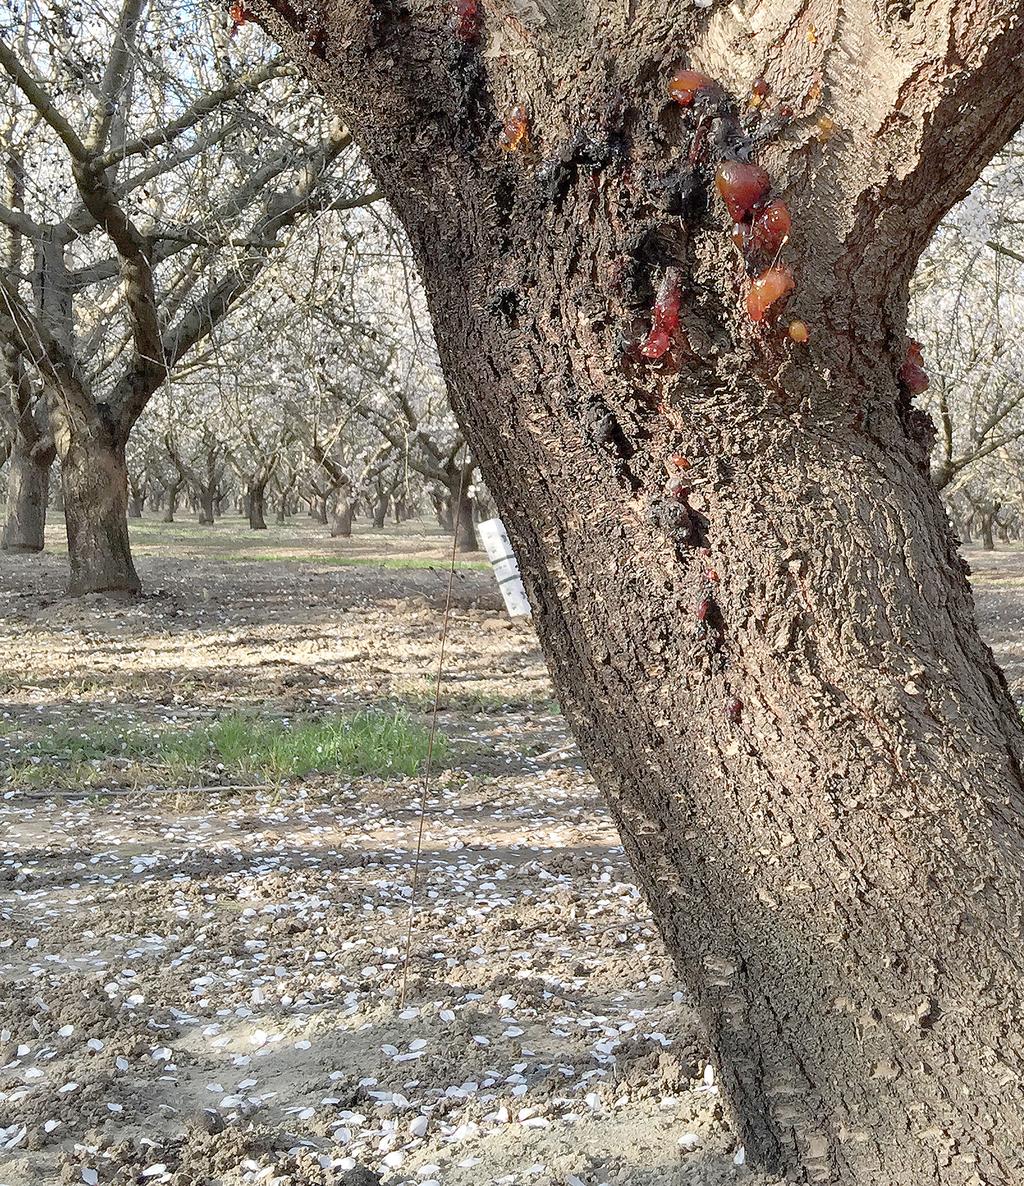 DIAGNOSIS AND MANAGEMENT OF CANKER DISEASES IN ALMONDS By Florent Trouillas Assistant Cooperative Extension Specialist article, I will provide an overview of the main canker diseases that impact